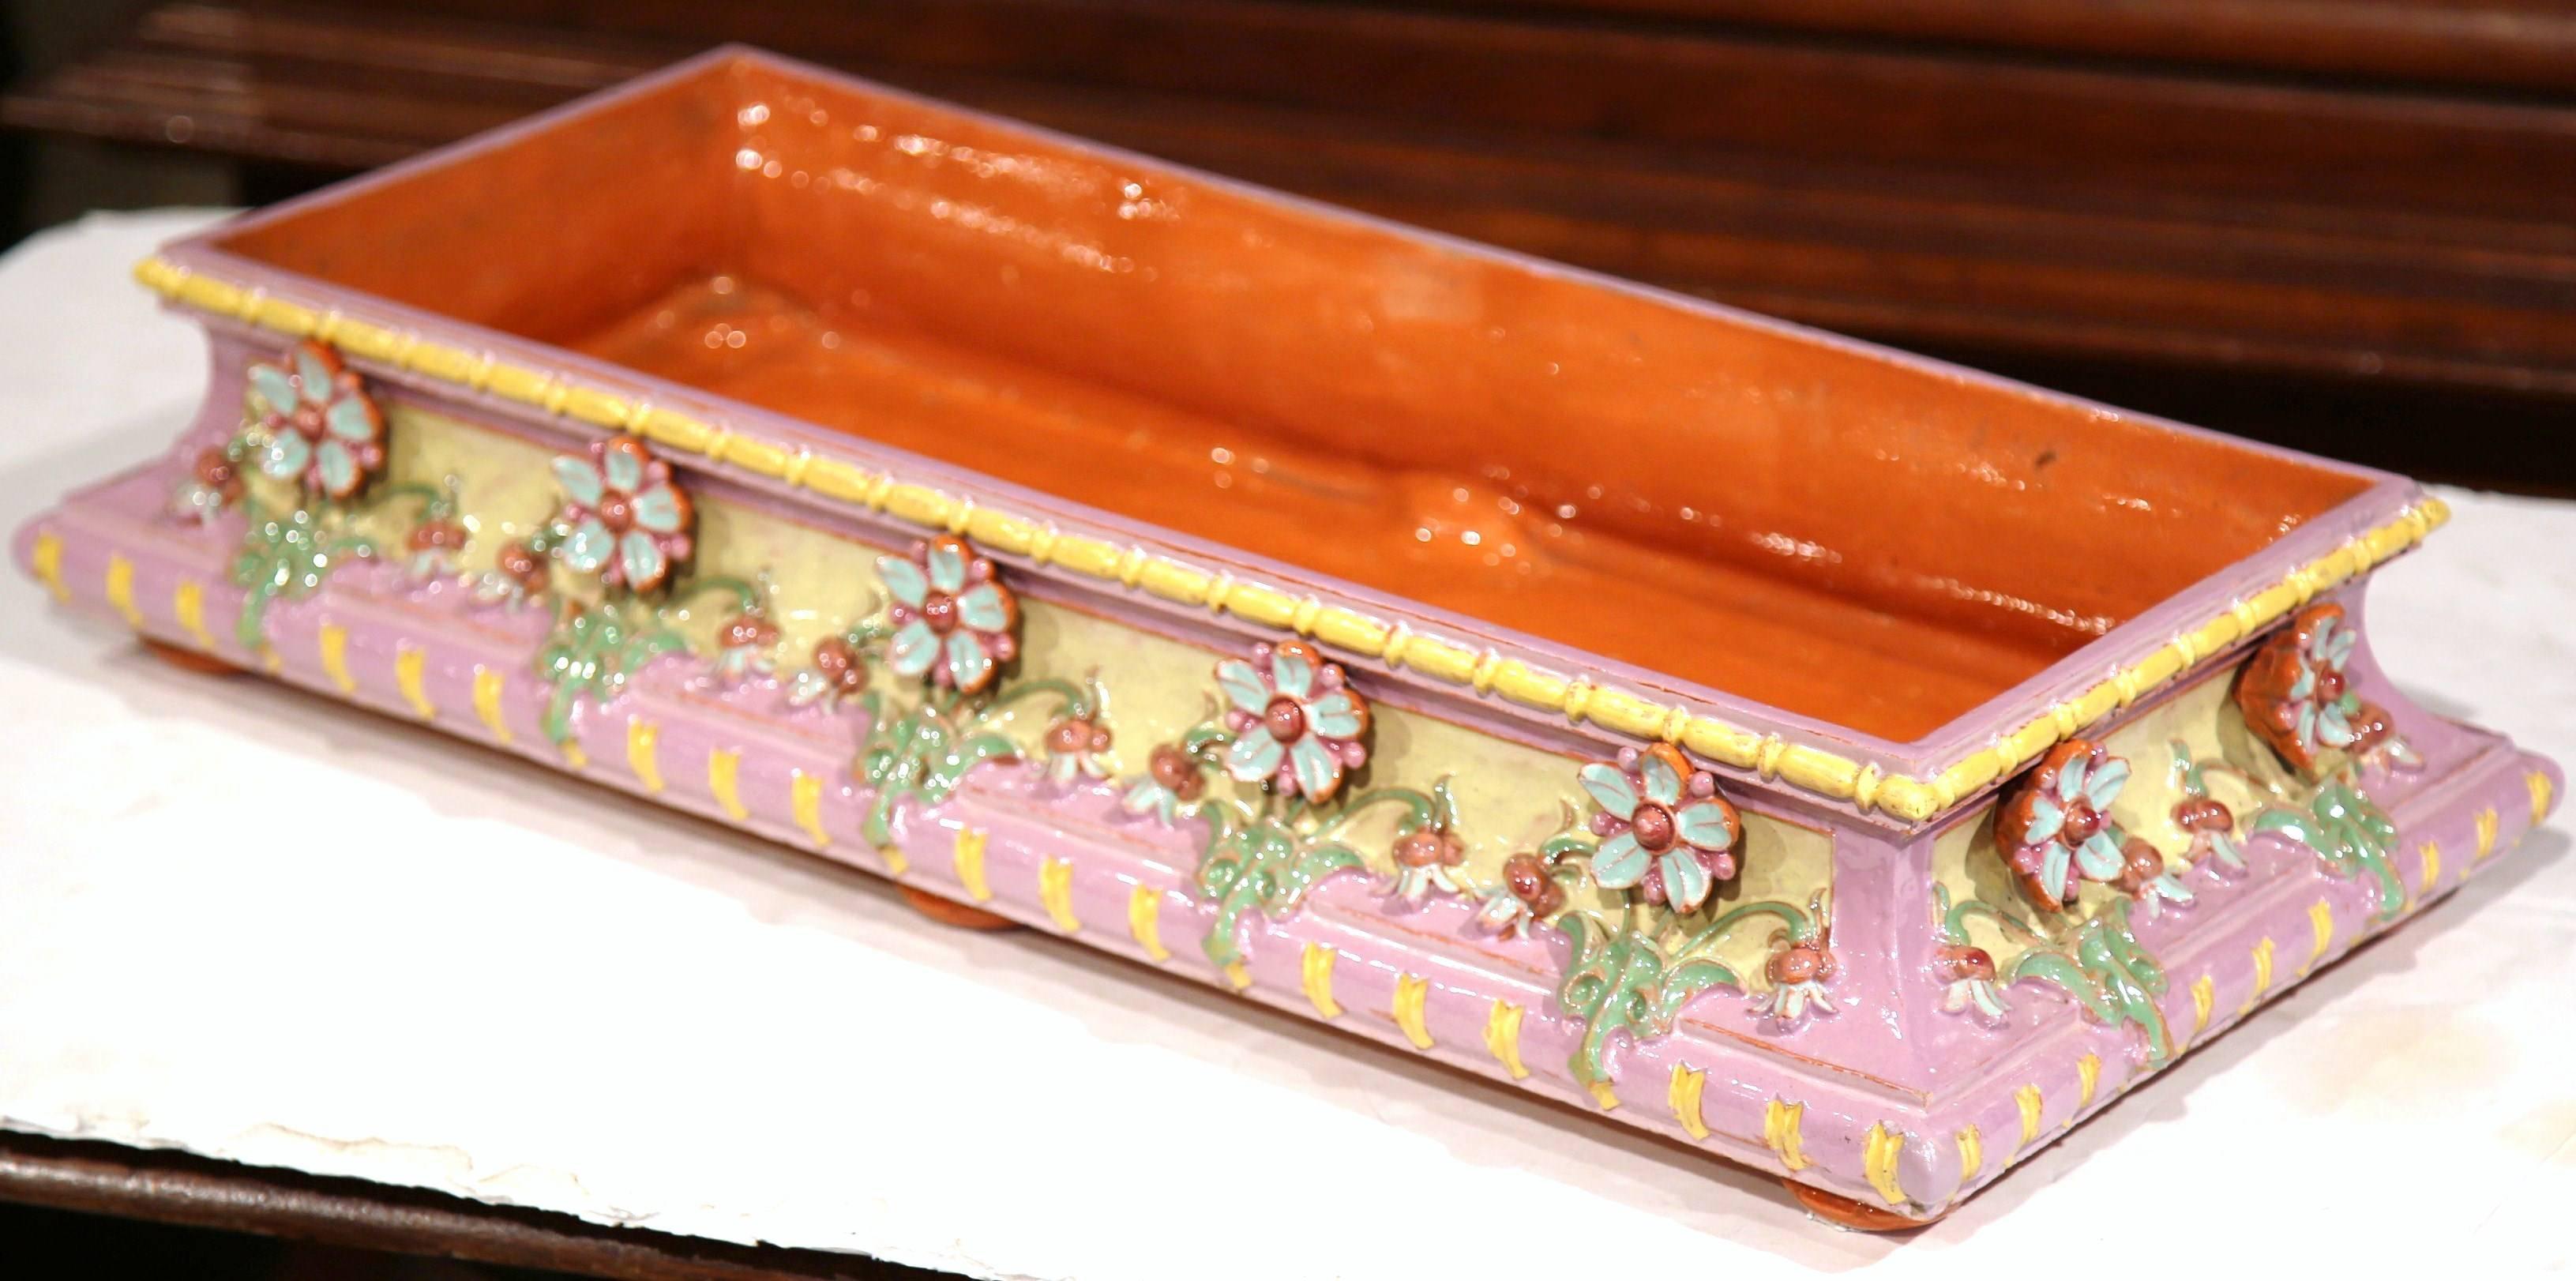 This beautifully crafted Majolica jardinière was sculpted in central France circa 1960. Painted in a feminine pink and yellow color palette, the ceramic would make a colorful addition to a tabletop in any room. The large, colorful planter is signed